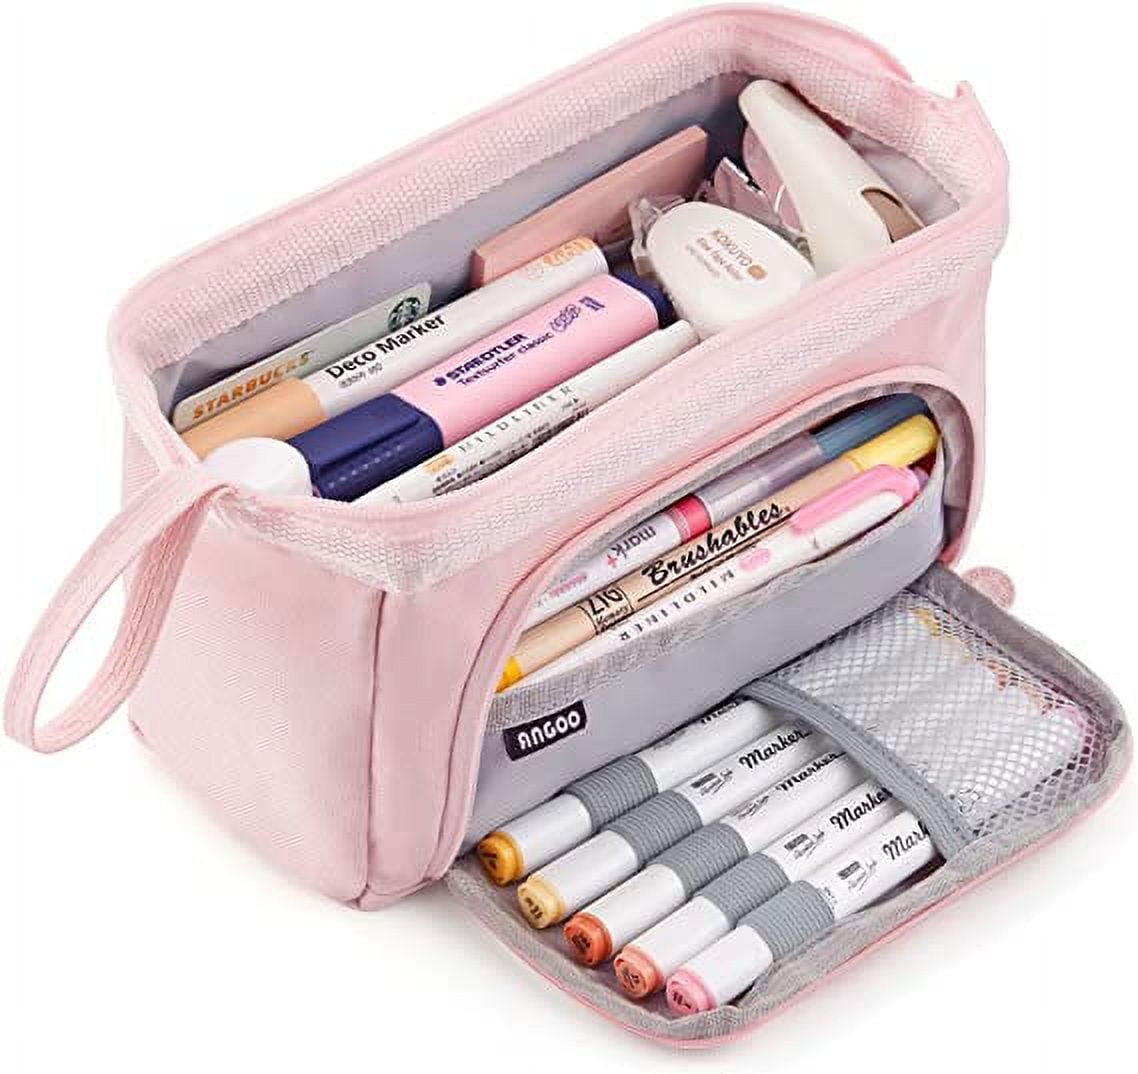 svlftecon Kawaii Pencil Case for Girls Boys Comes with 6 Free Pens Canvas Office Stationery Bag Organizer Pouch Portable Pencil Bag, Pink